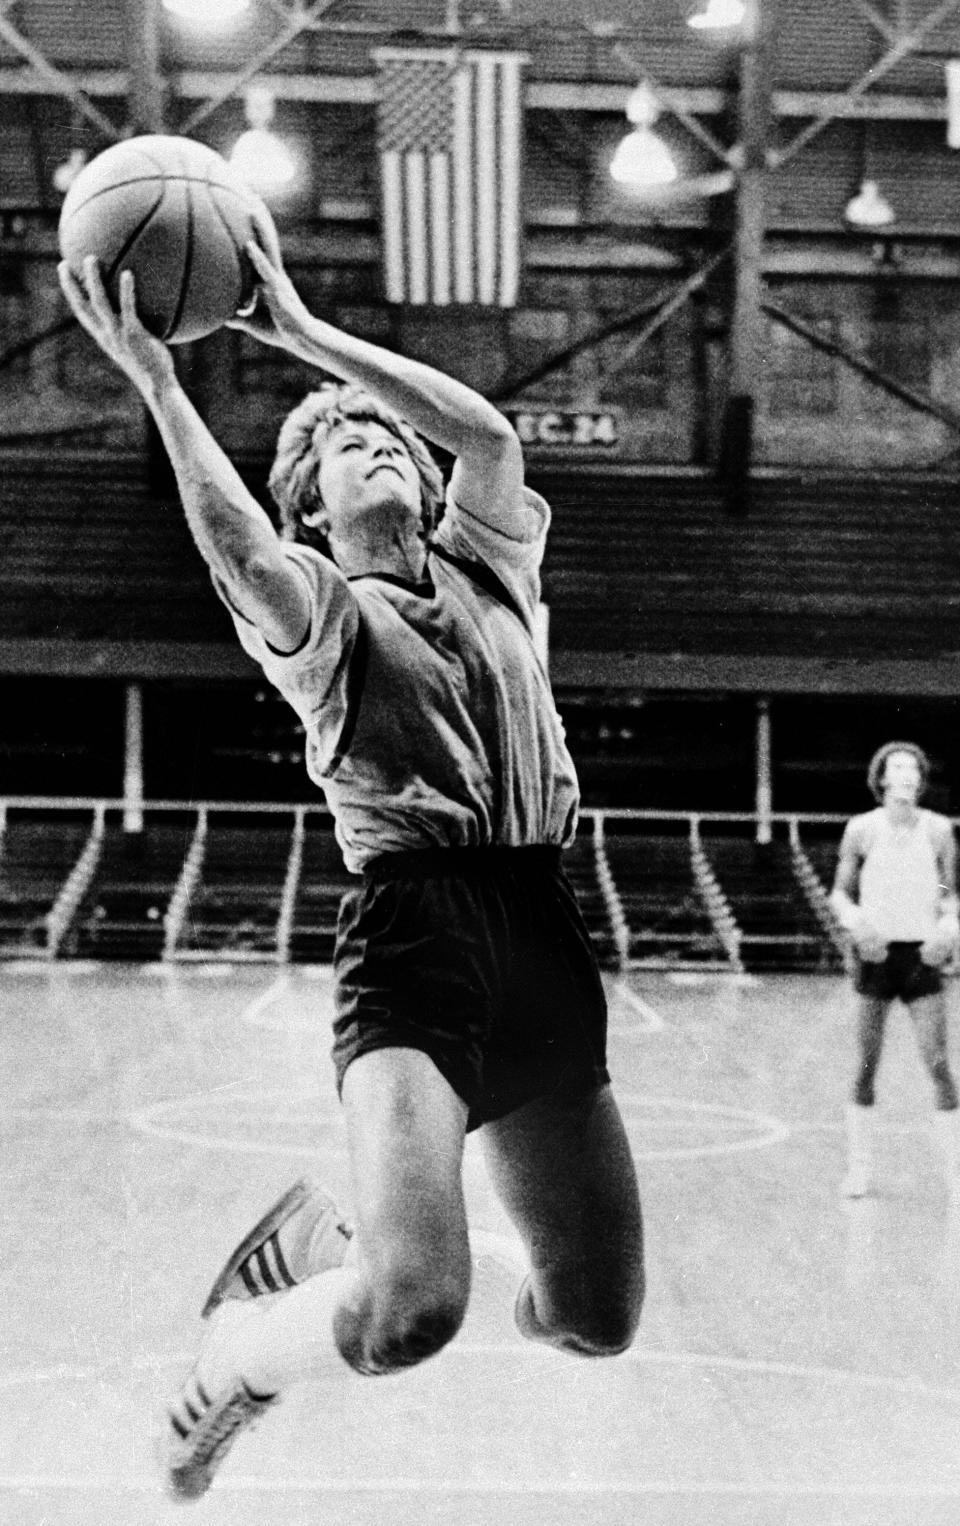 Ann Meyers Drysdale: First woman to sign an NBA contract when she signed as a free agent with the Indiana Pacers (1979).